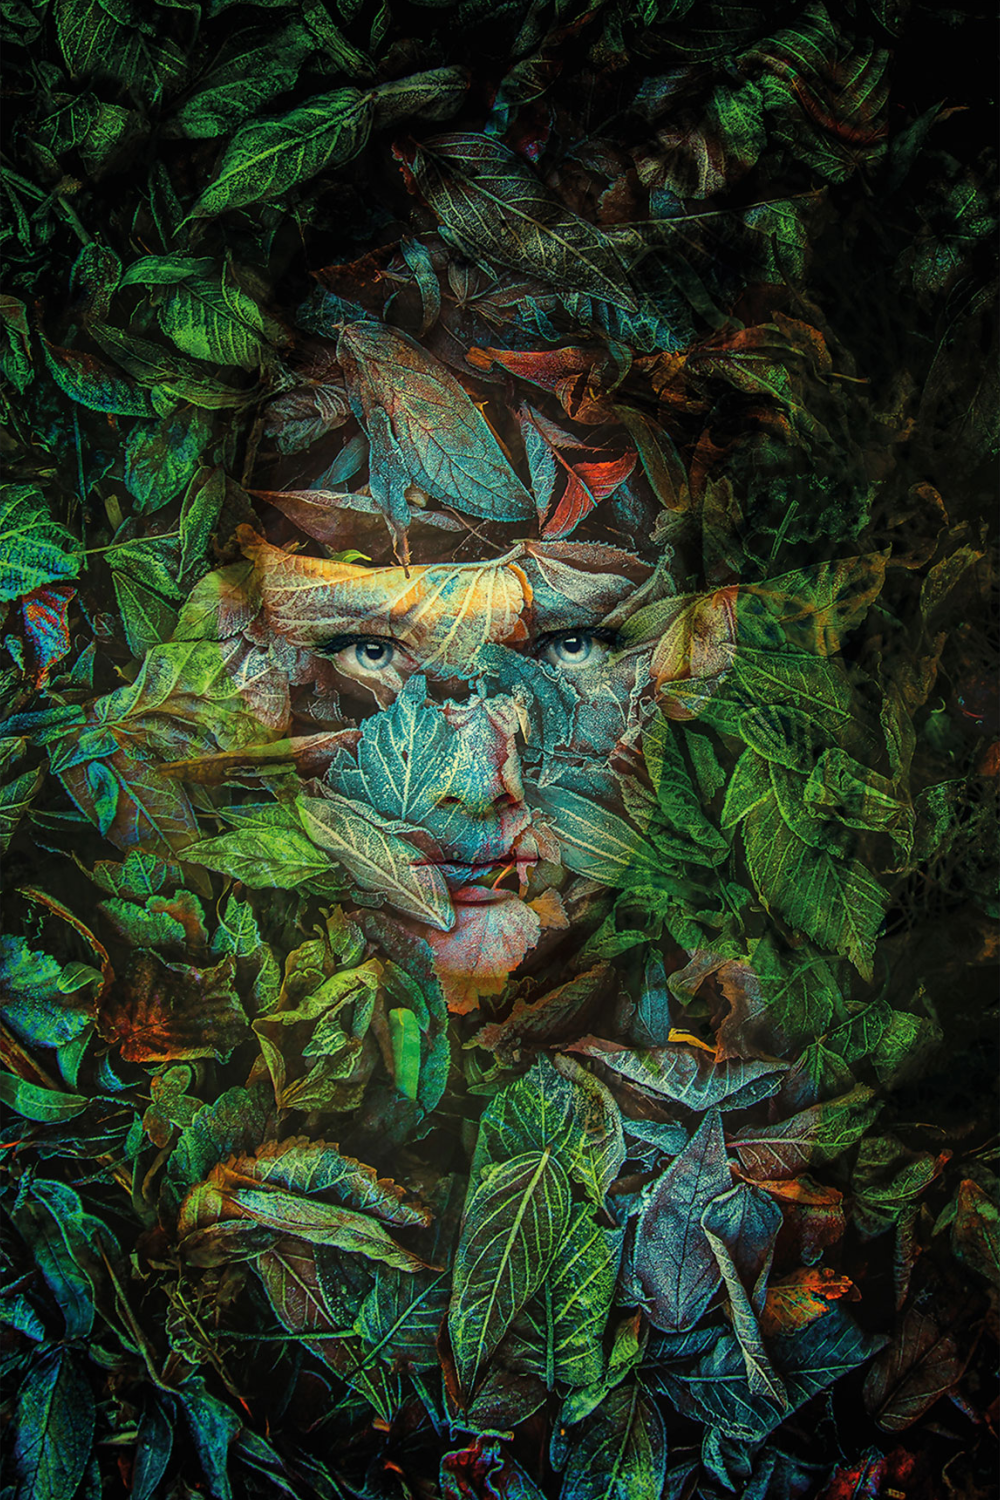 Face Beneath Leaves Photographic Artwork | Andrew Martin Camouflage